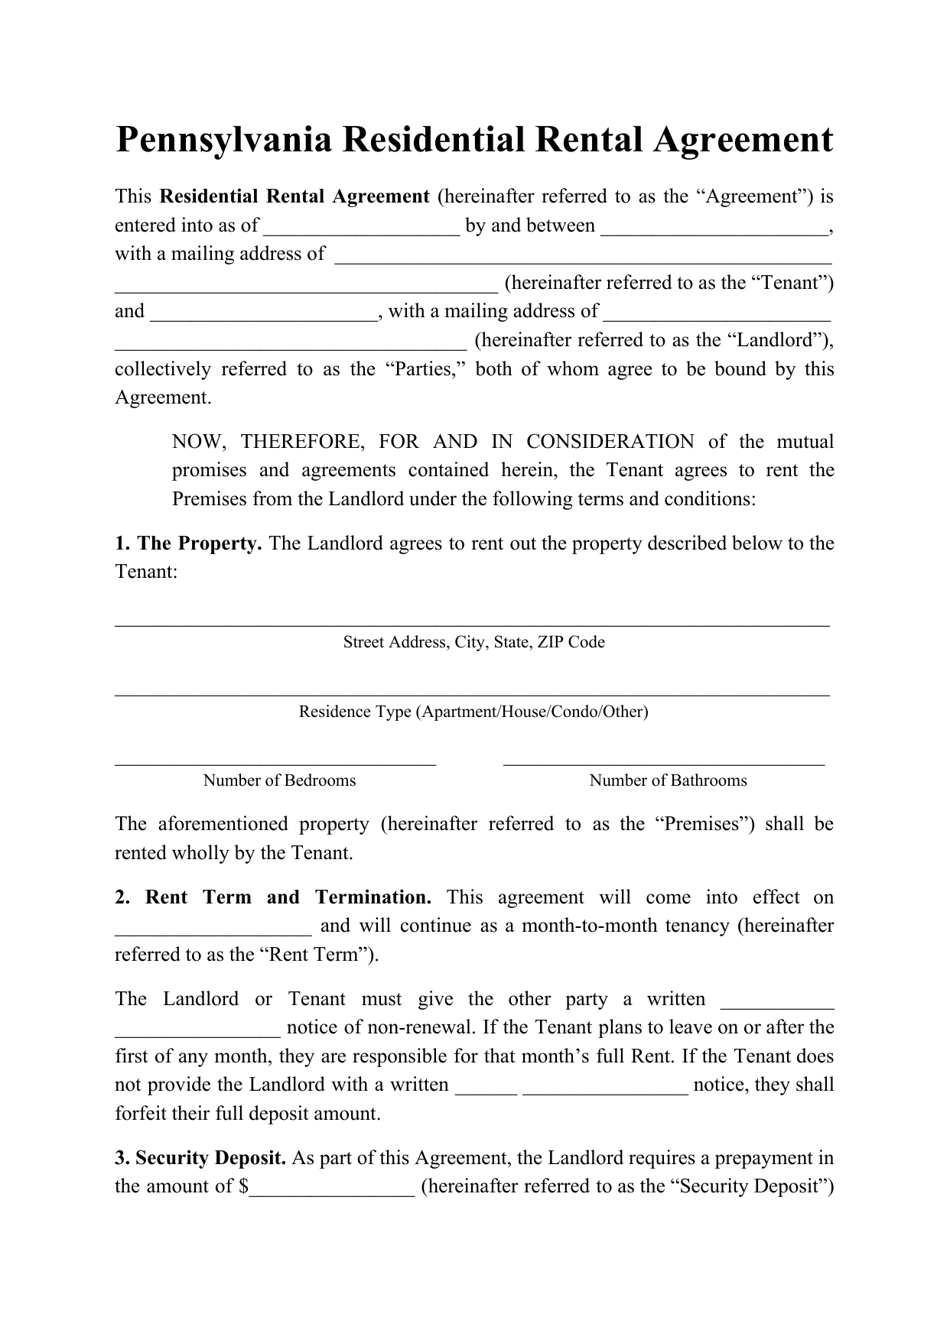 Residential Rental Agreement Template - Pennsylvania, Page 1